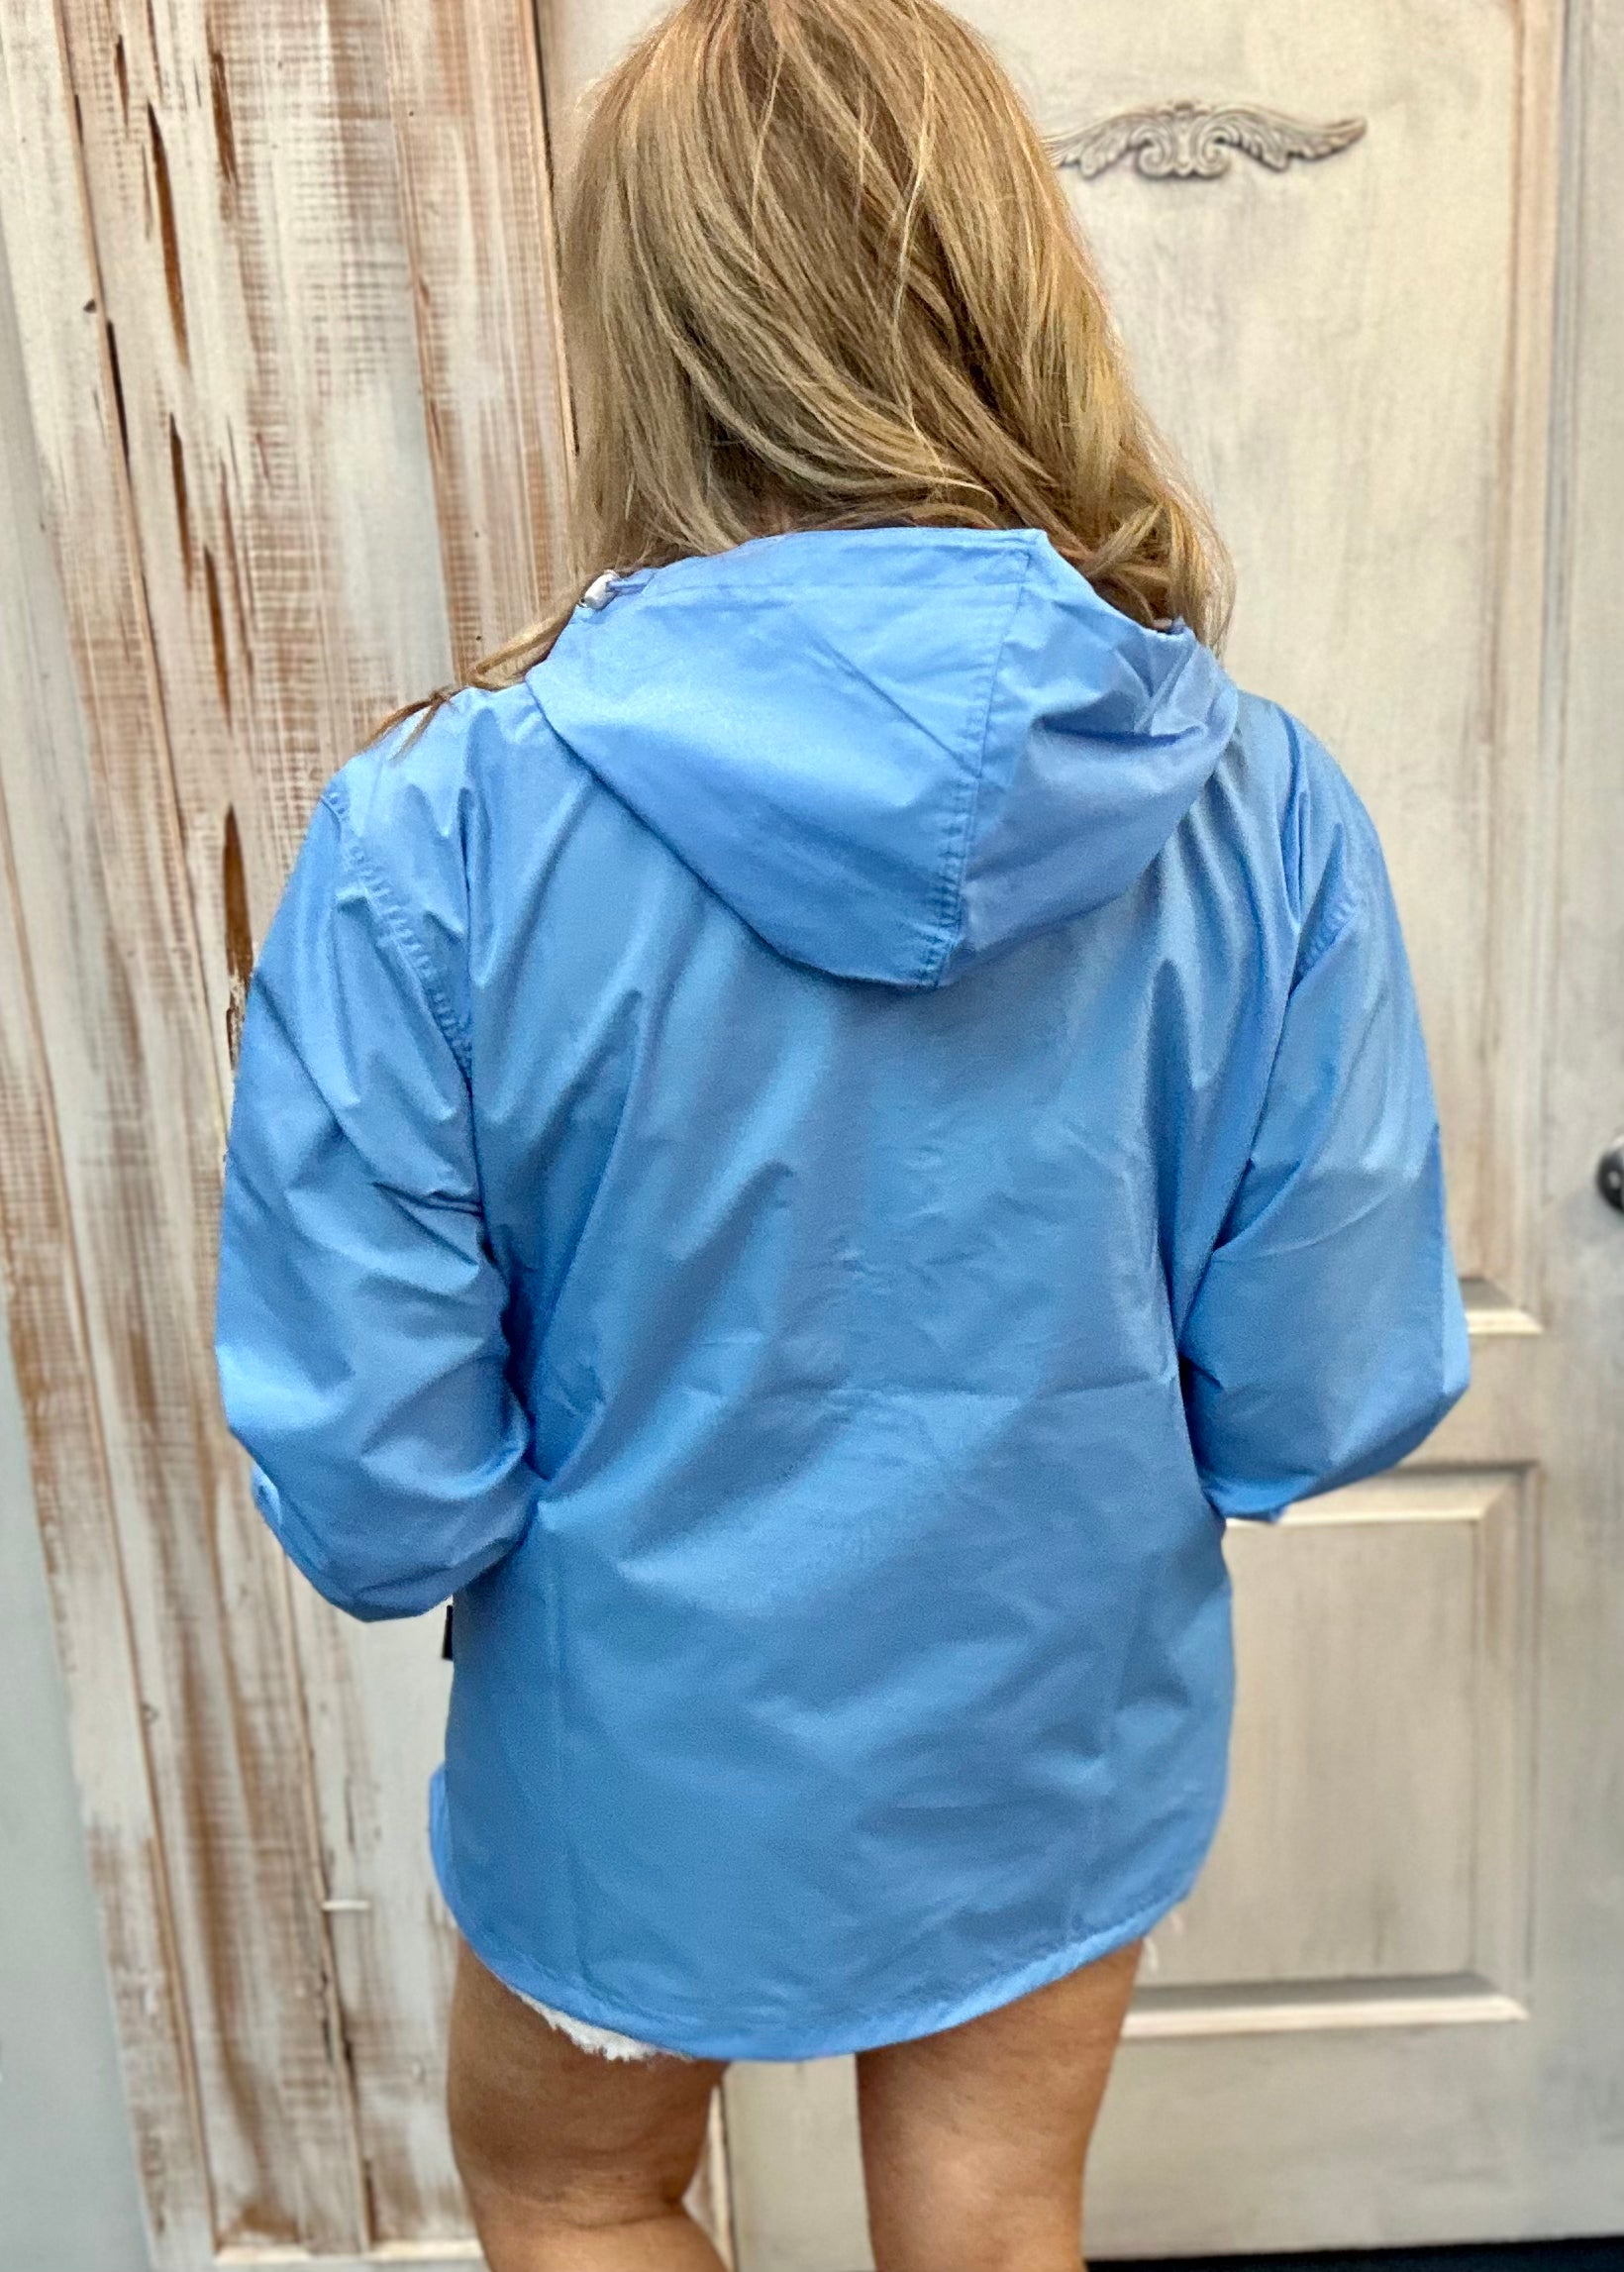 Kim wearing our new Charles River Unlined Pullover Rain Jacket, Standing in front our a dressing room. Back View with hood.